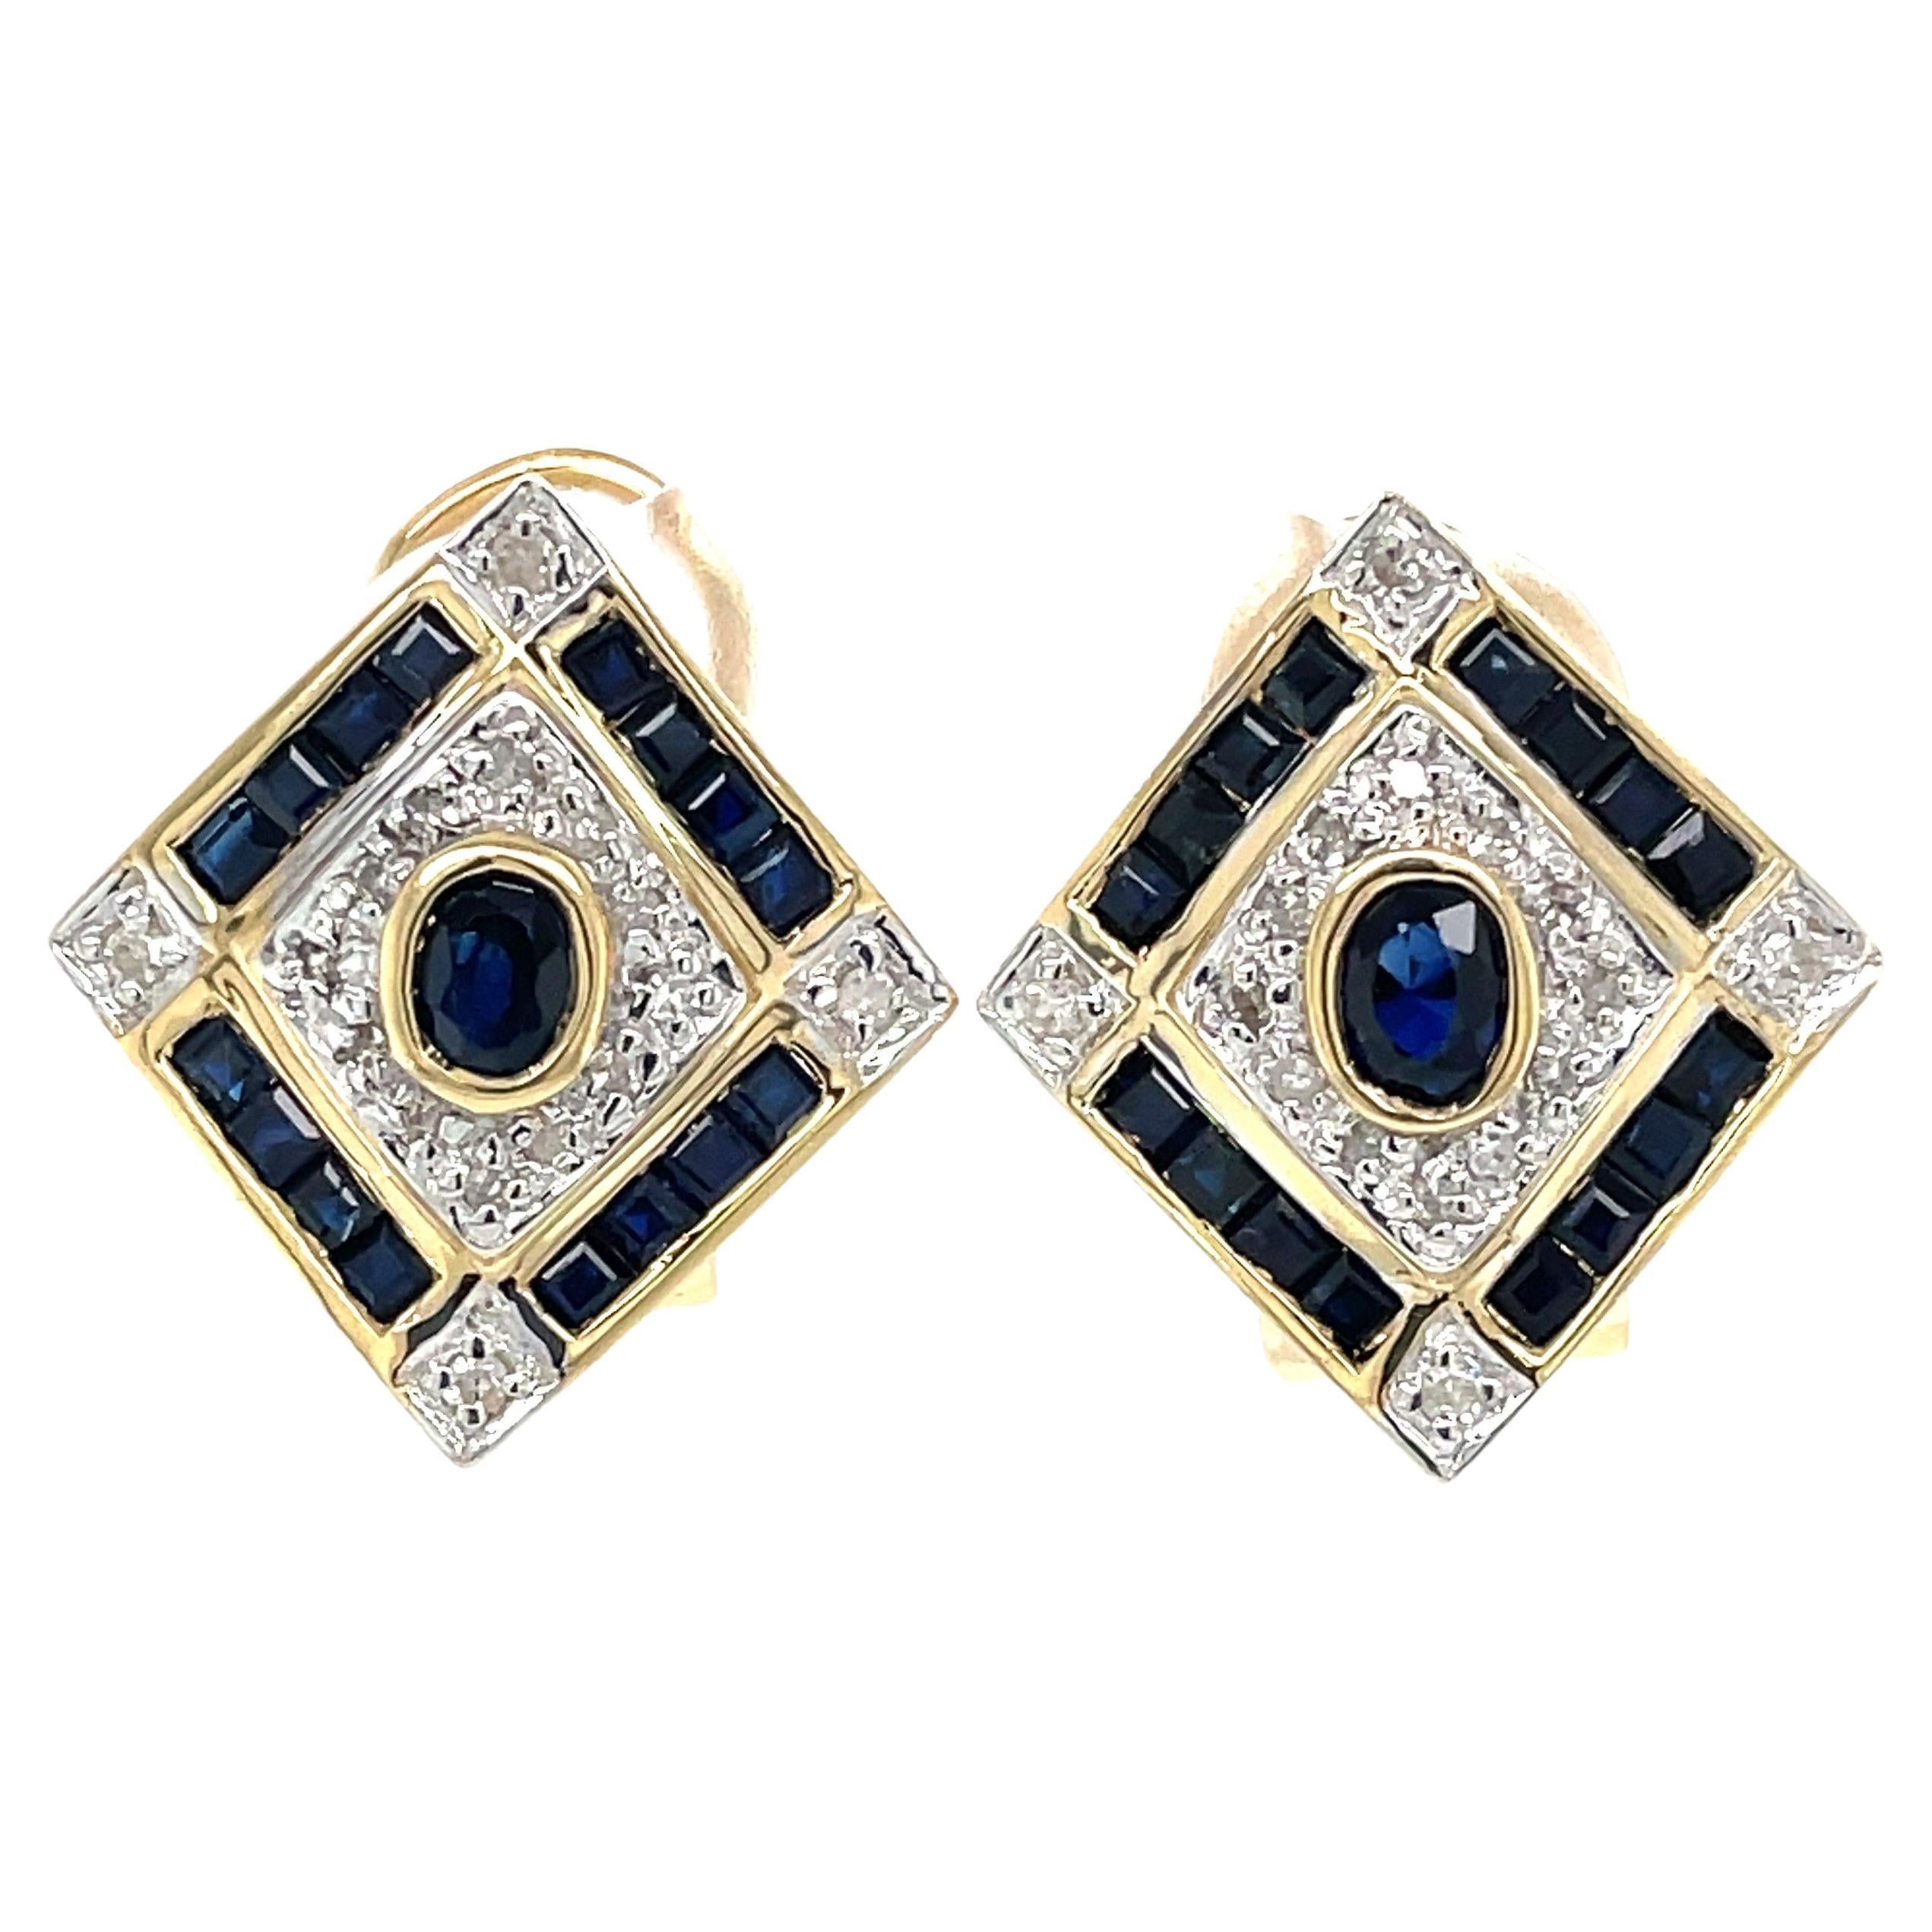 In Art Deco style, this attractive 14 karat yellow gold earring pair's design has center set blue round sapphire bezel set and framed by matching square cut sapphires, .64 TW.  Adding light to this regal pair, are small diamonds accents, .24 TW